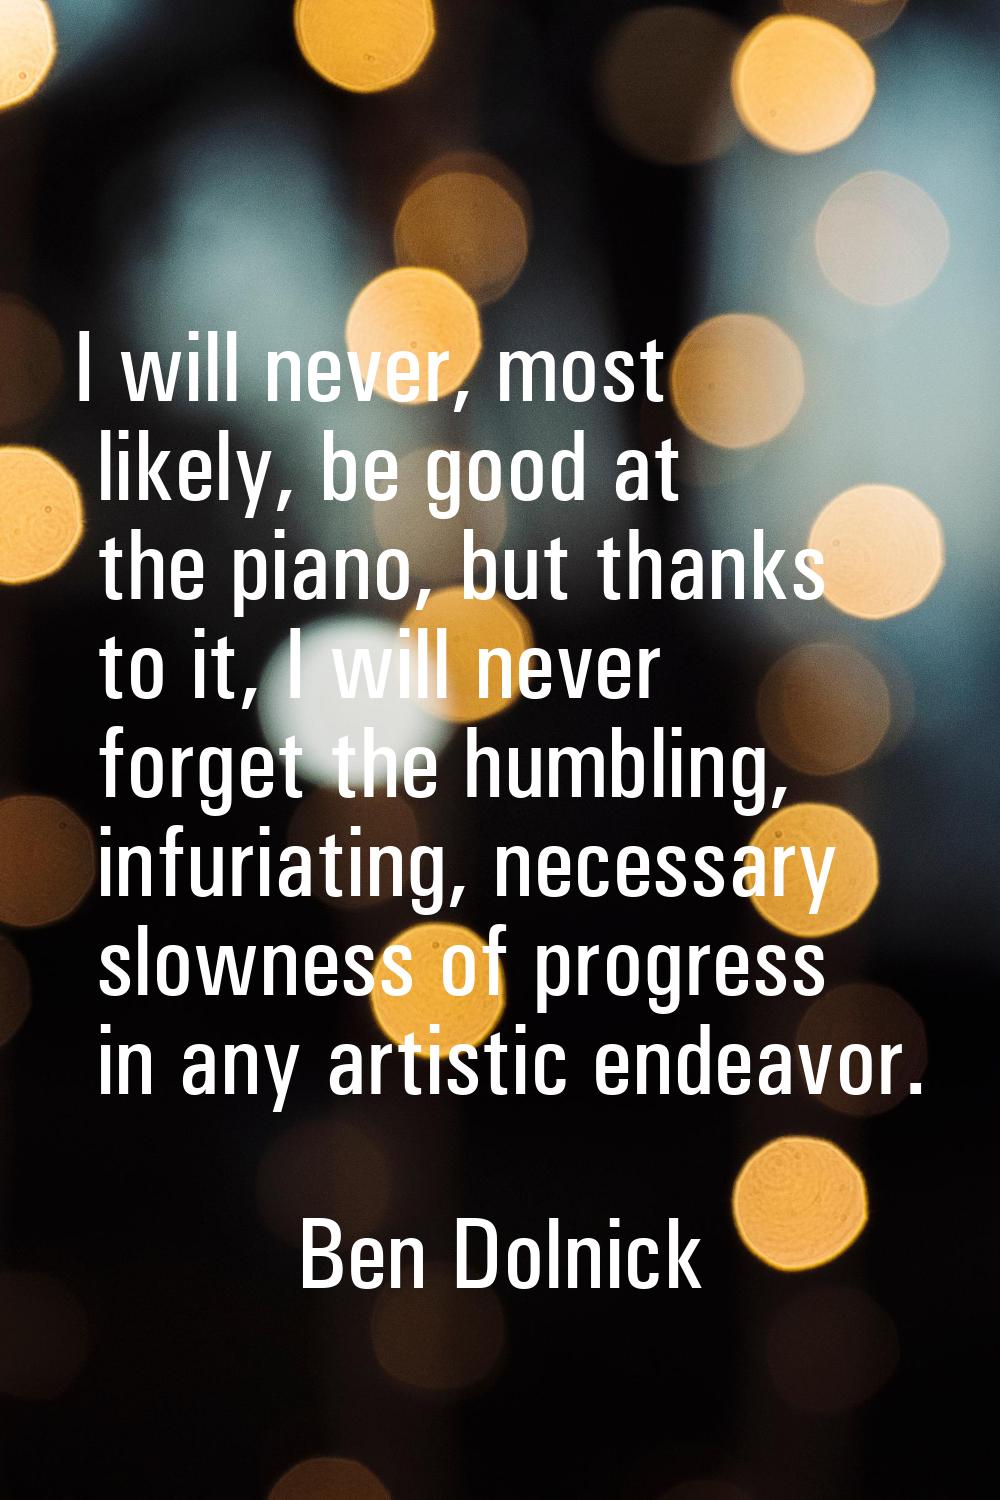 I will never, most likely, be good at the piano, but thanks to it, I will never forget the humbling